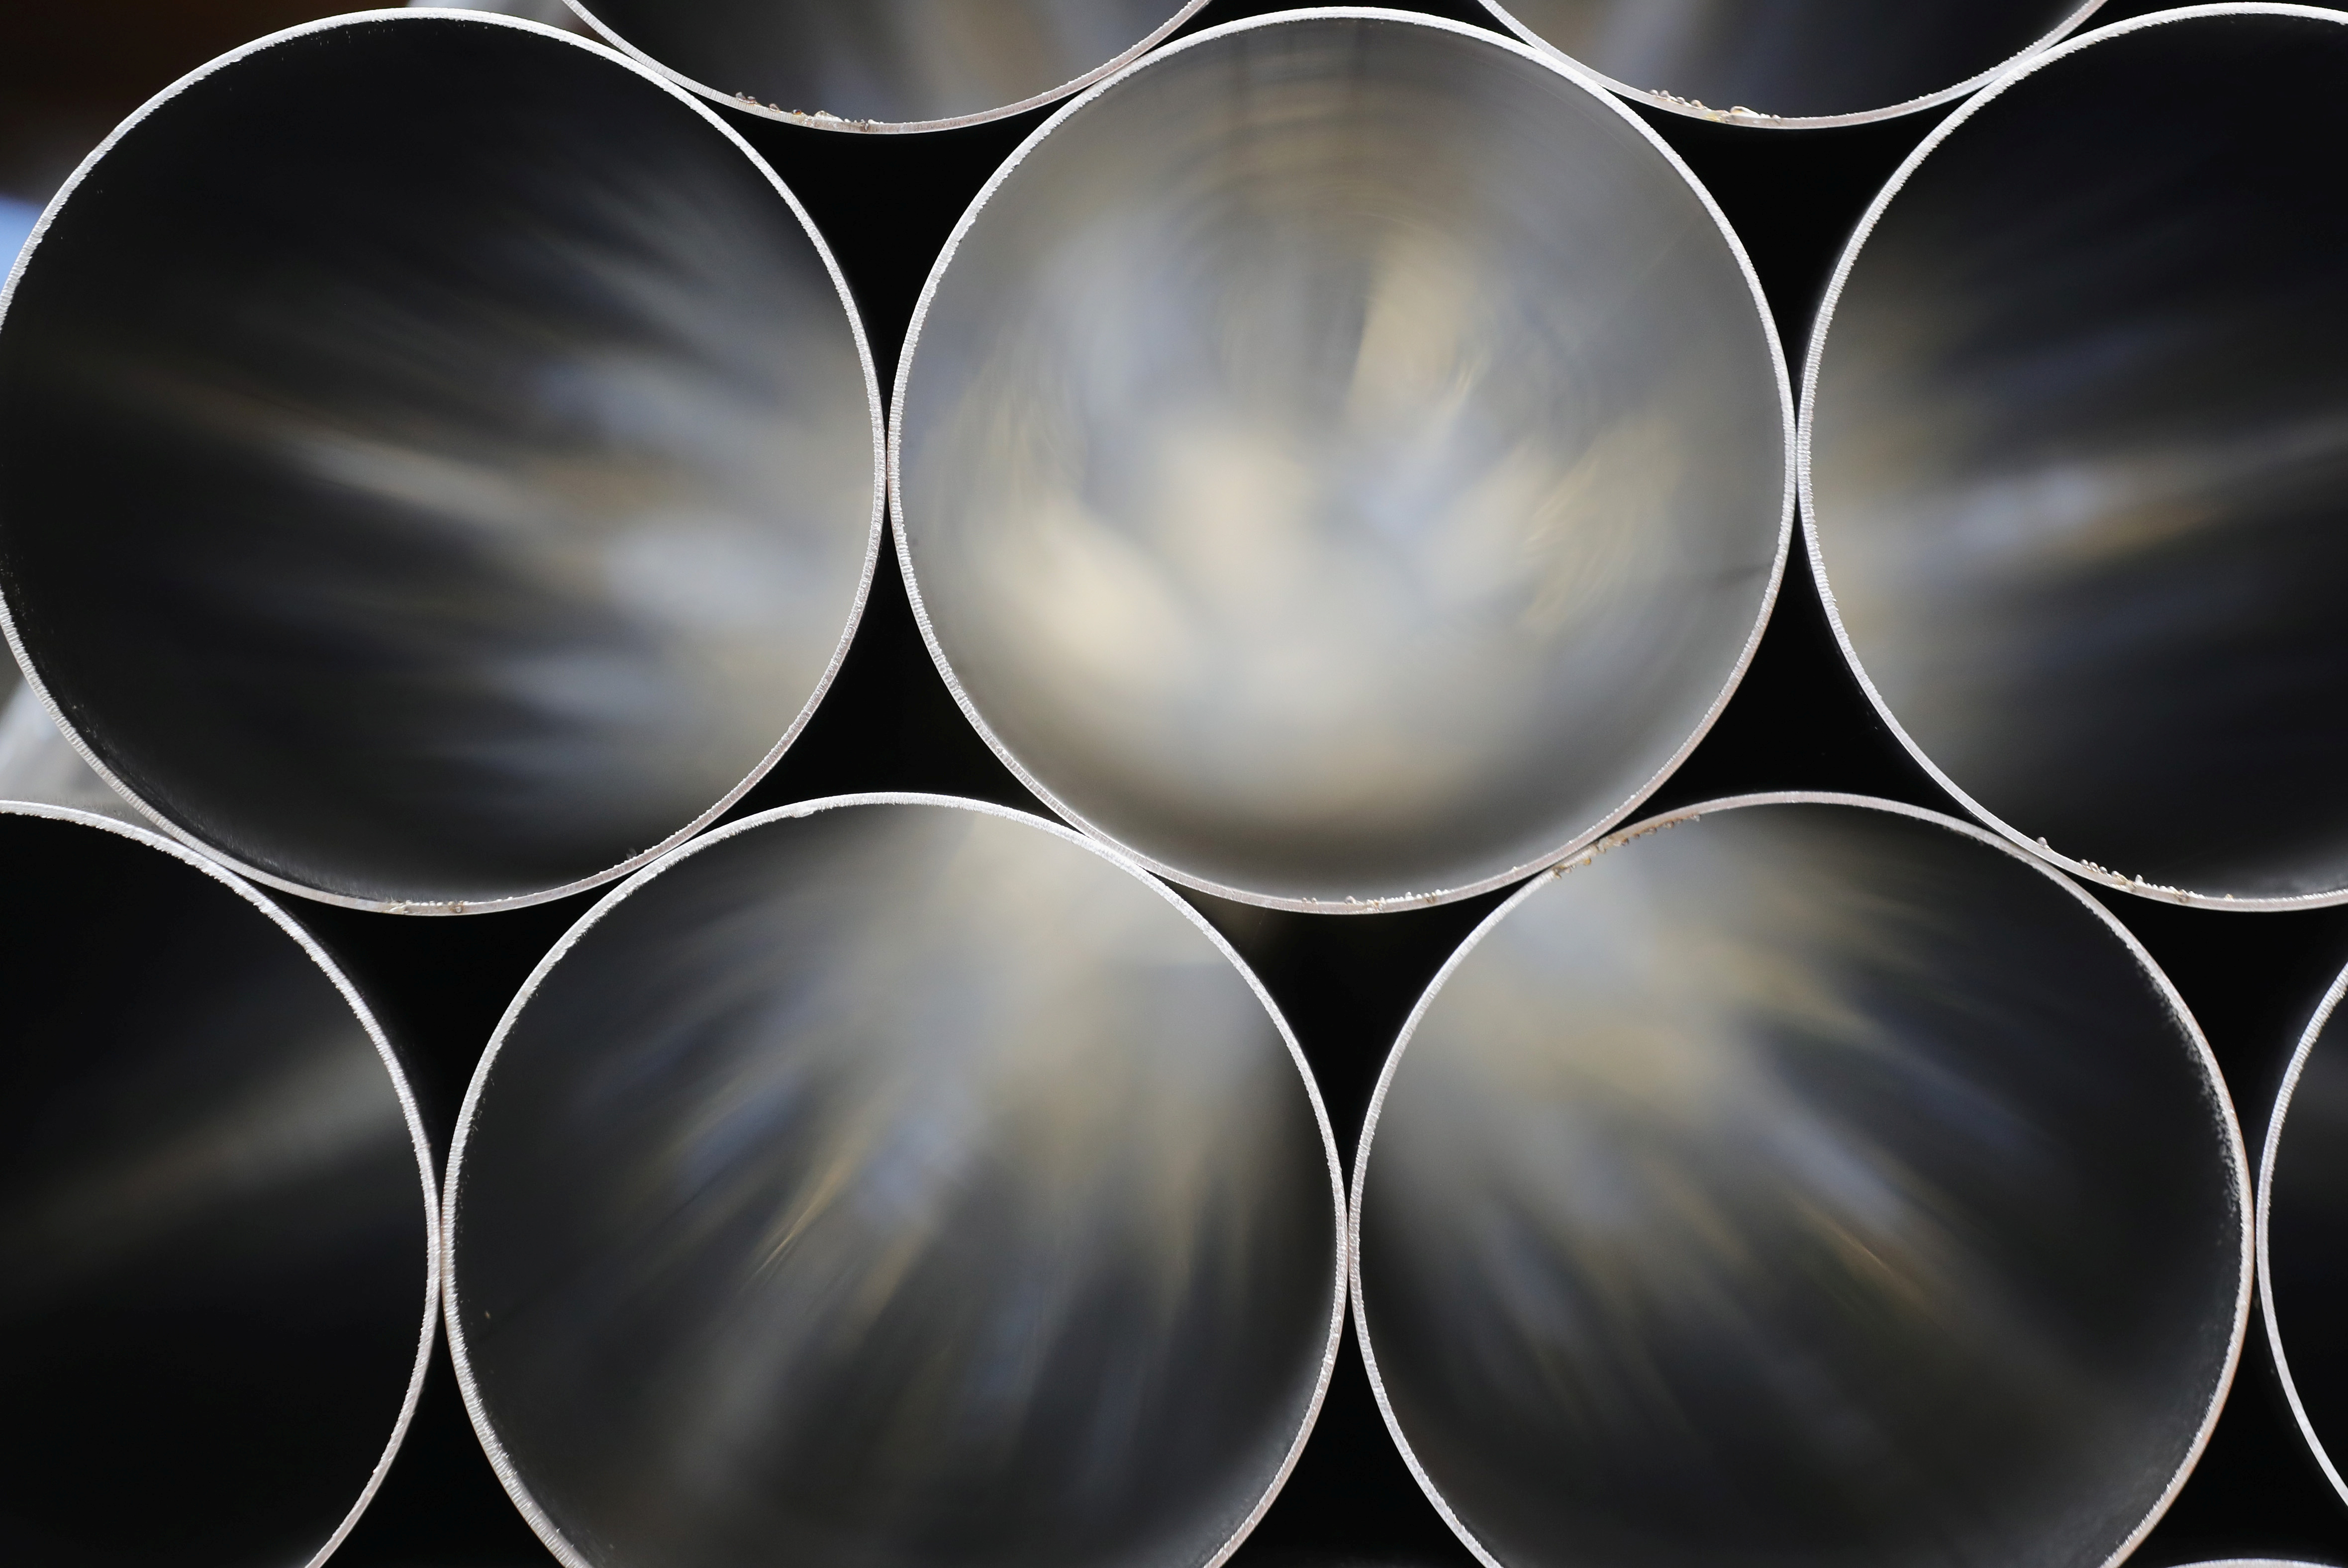 Stainless steel tubes are stored ready to be made into exhausts at the Eminox factory, during a post-Budget visit by Britain's Chancellor of the Exchequer Philip Hammond, in Gainsborough, Britain October 30, 2018.  Christopher Furlong/Pool via REUTERS